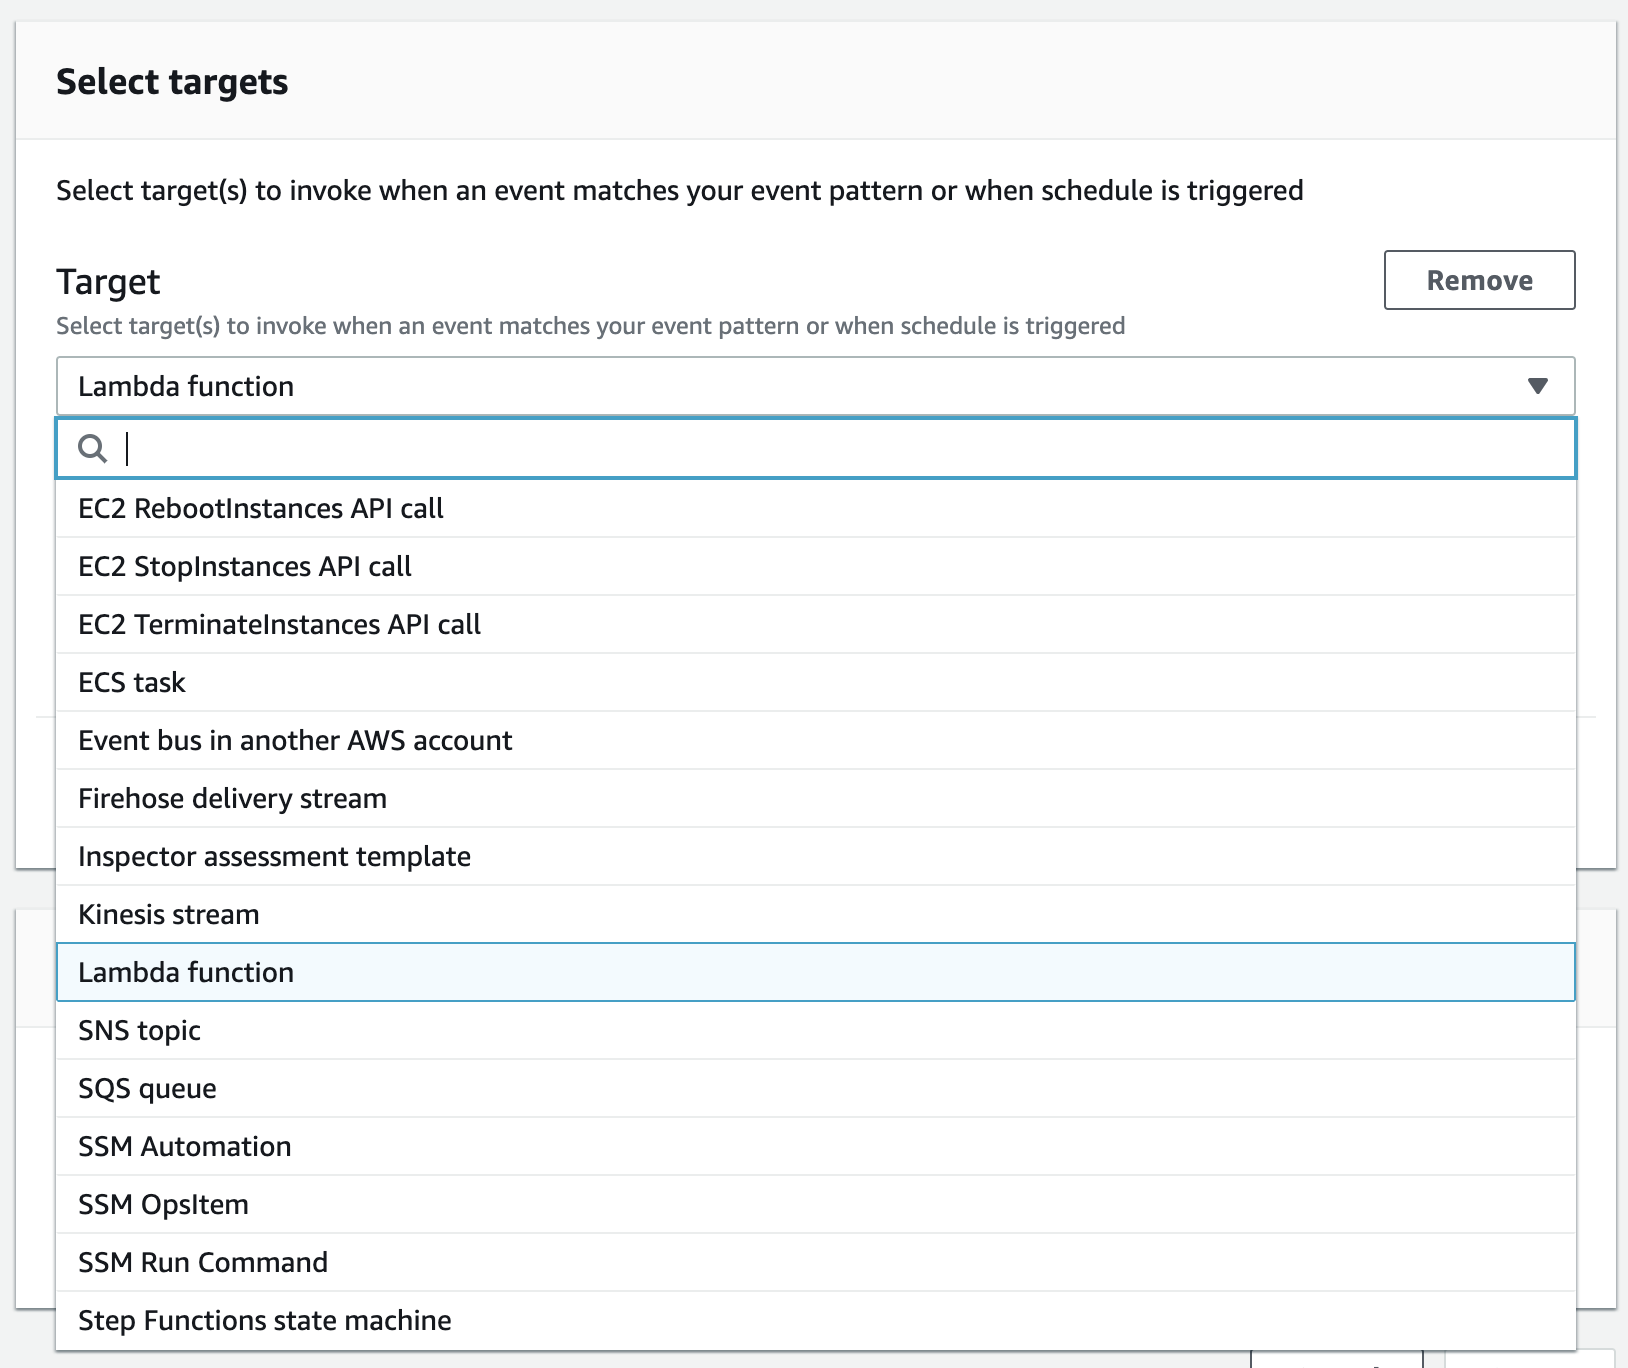 An image of the "Select targets" screen in AWS EventBridge.